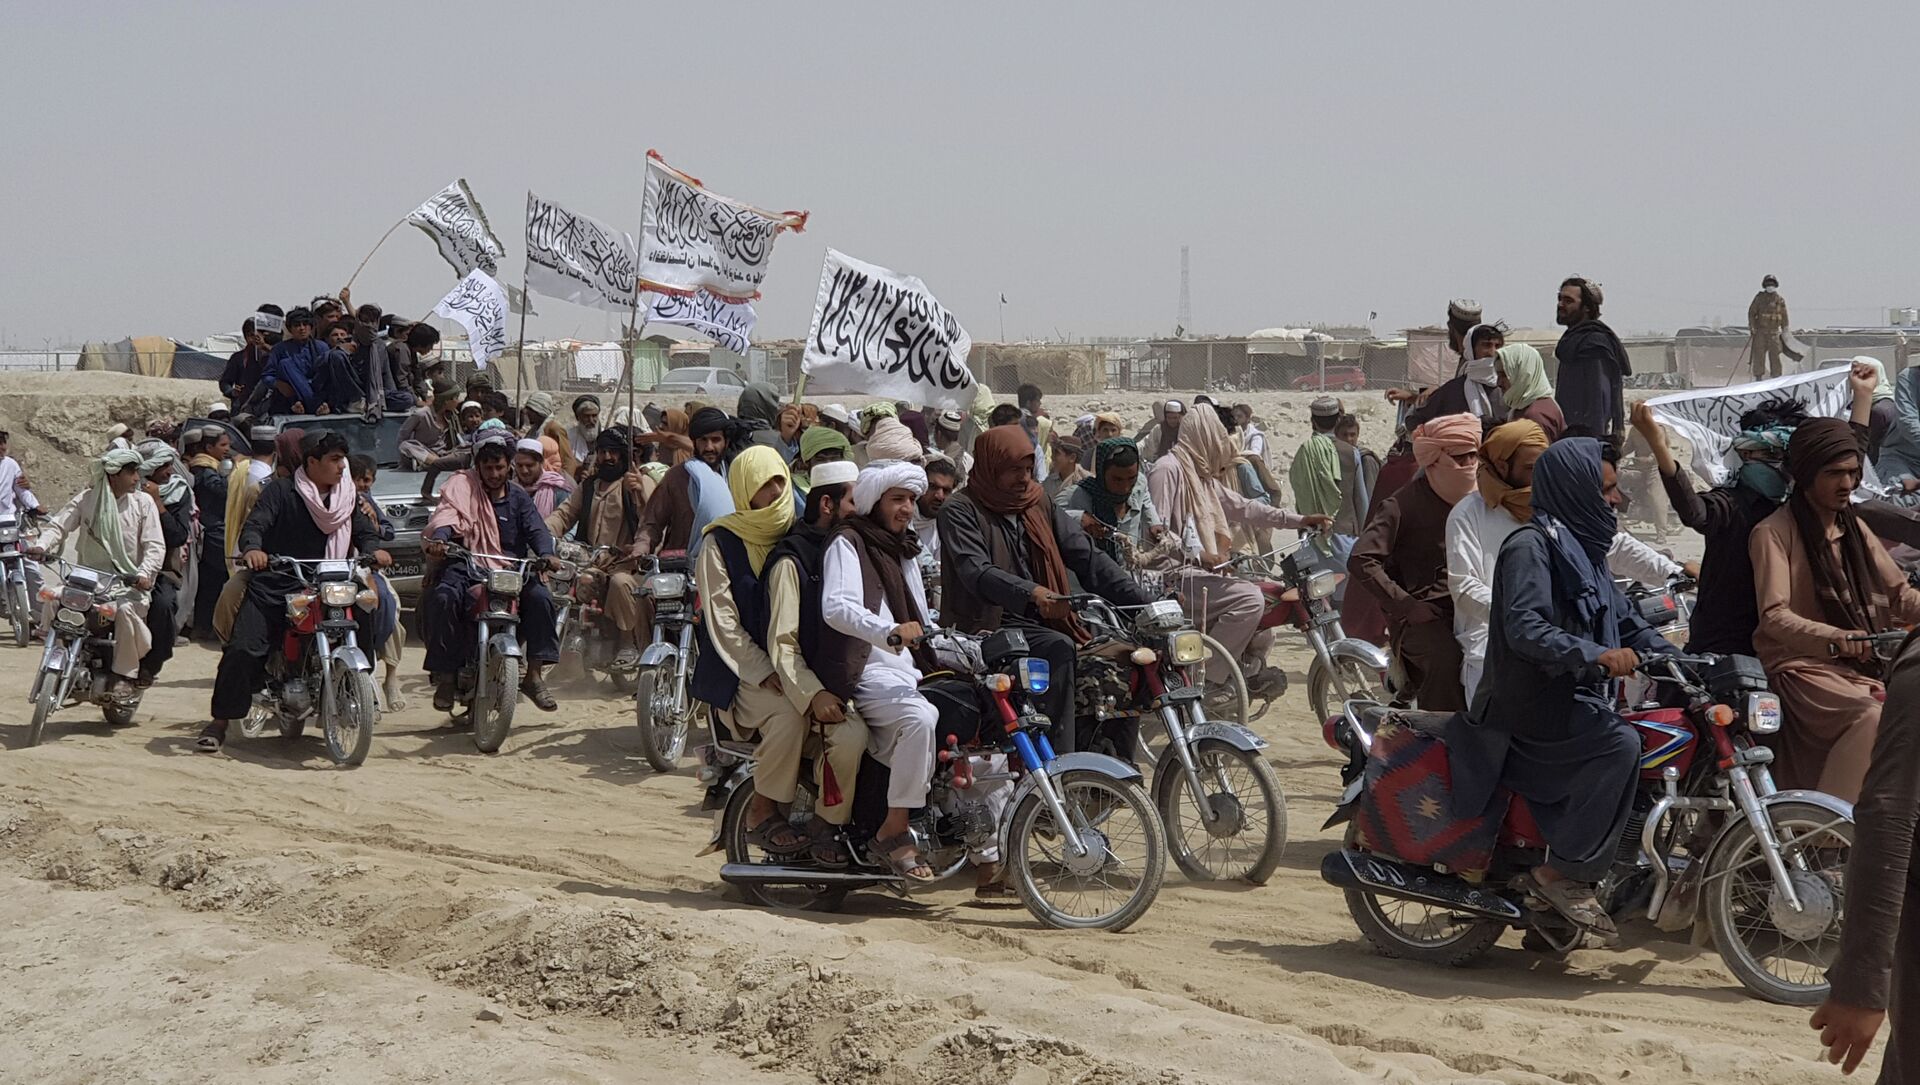 Supporters of the Taliban carry the Taliban's signature white flags in the Afghan-Pakistan border town of Chaman, Pakistan, Wednesday, July 14, 2021 - Sputnik International, 1920, 02.08.2021